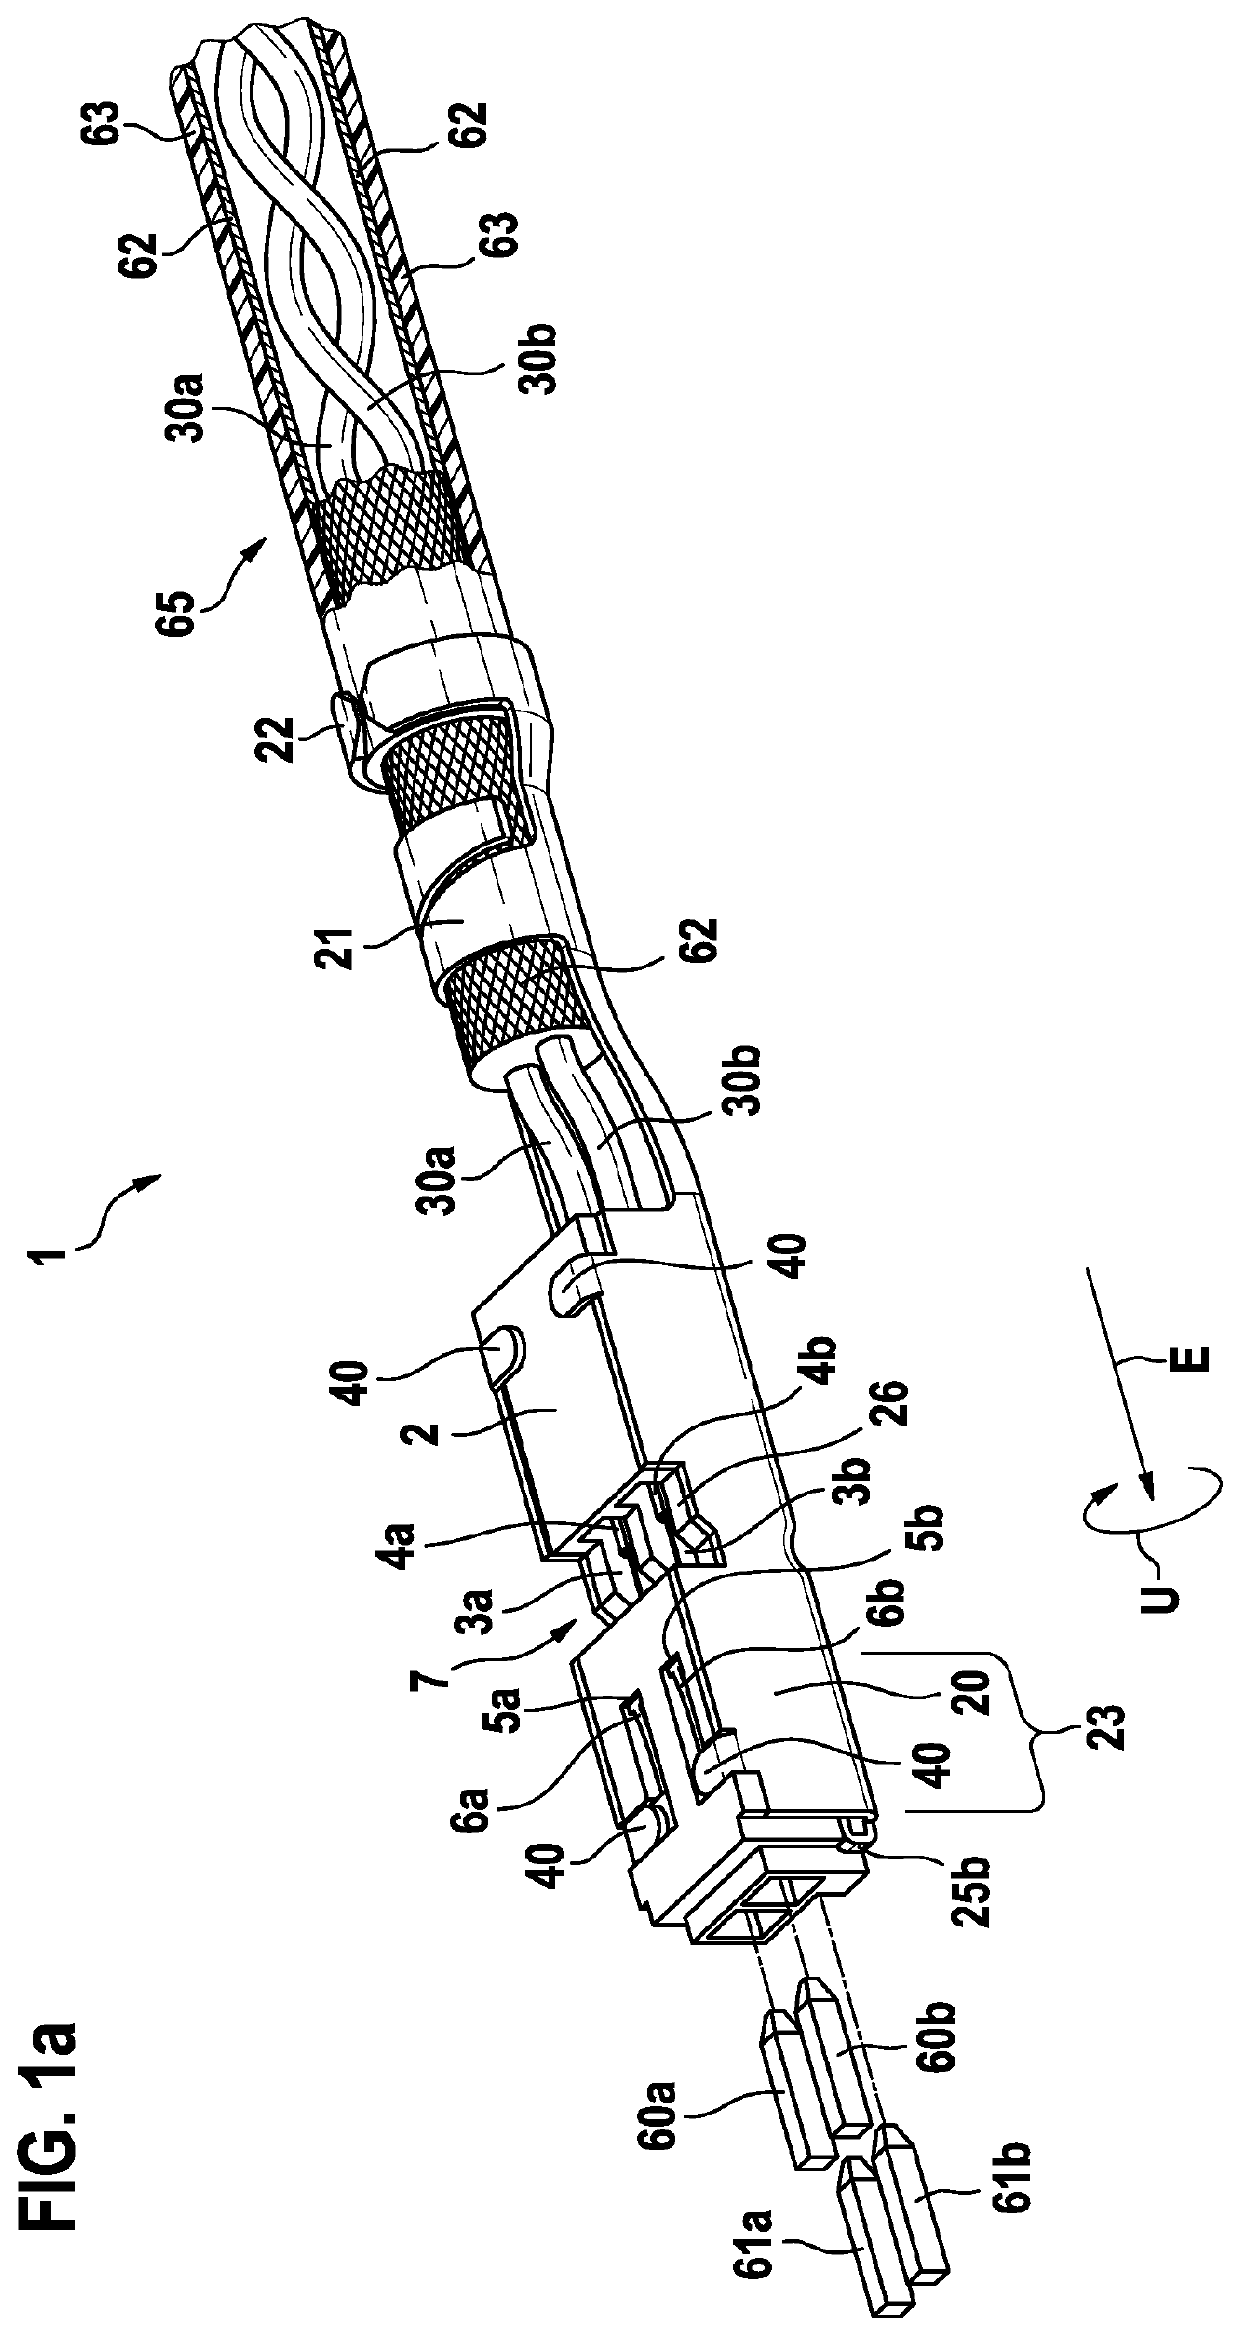 Ethernet plug connector for a motor vehicle  and plug connector assembly including an ethernet plug connector